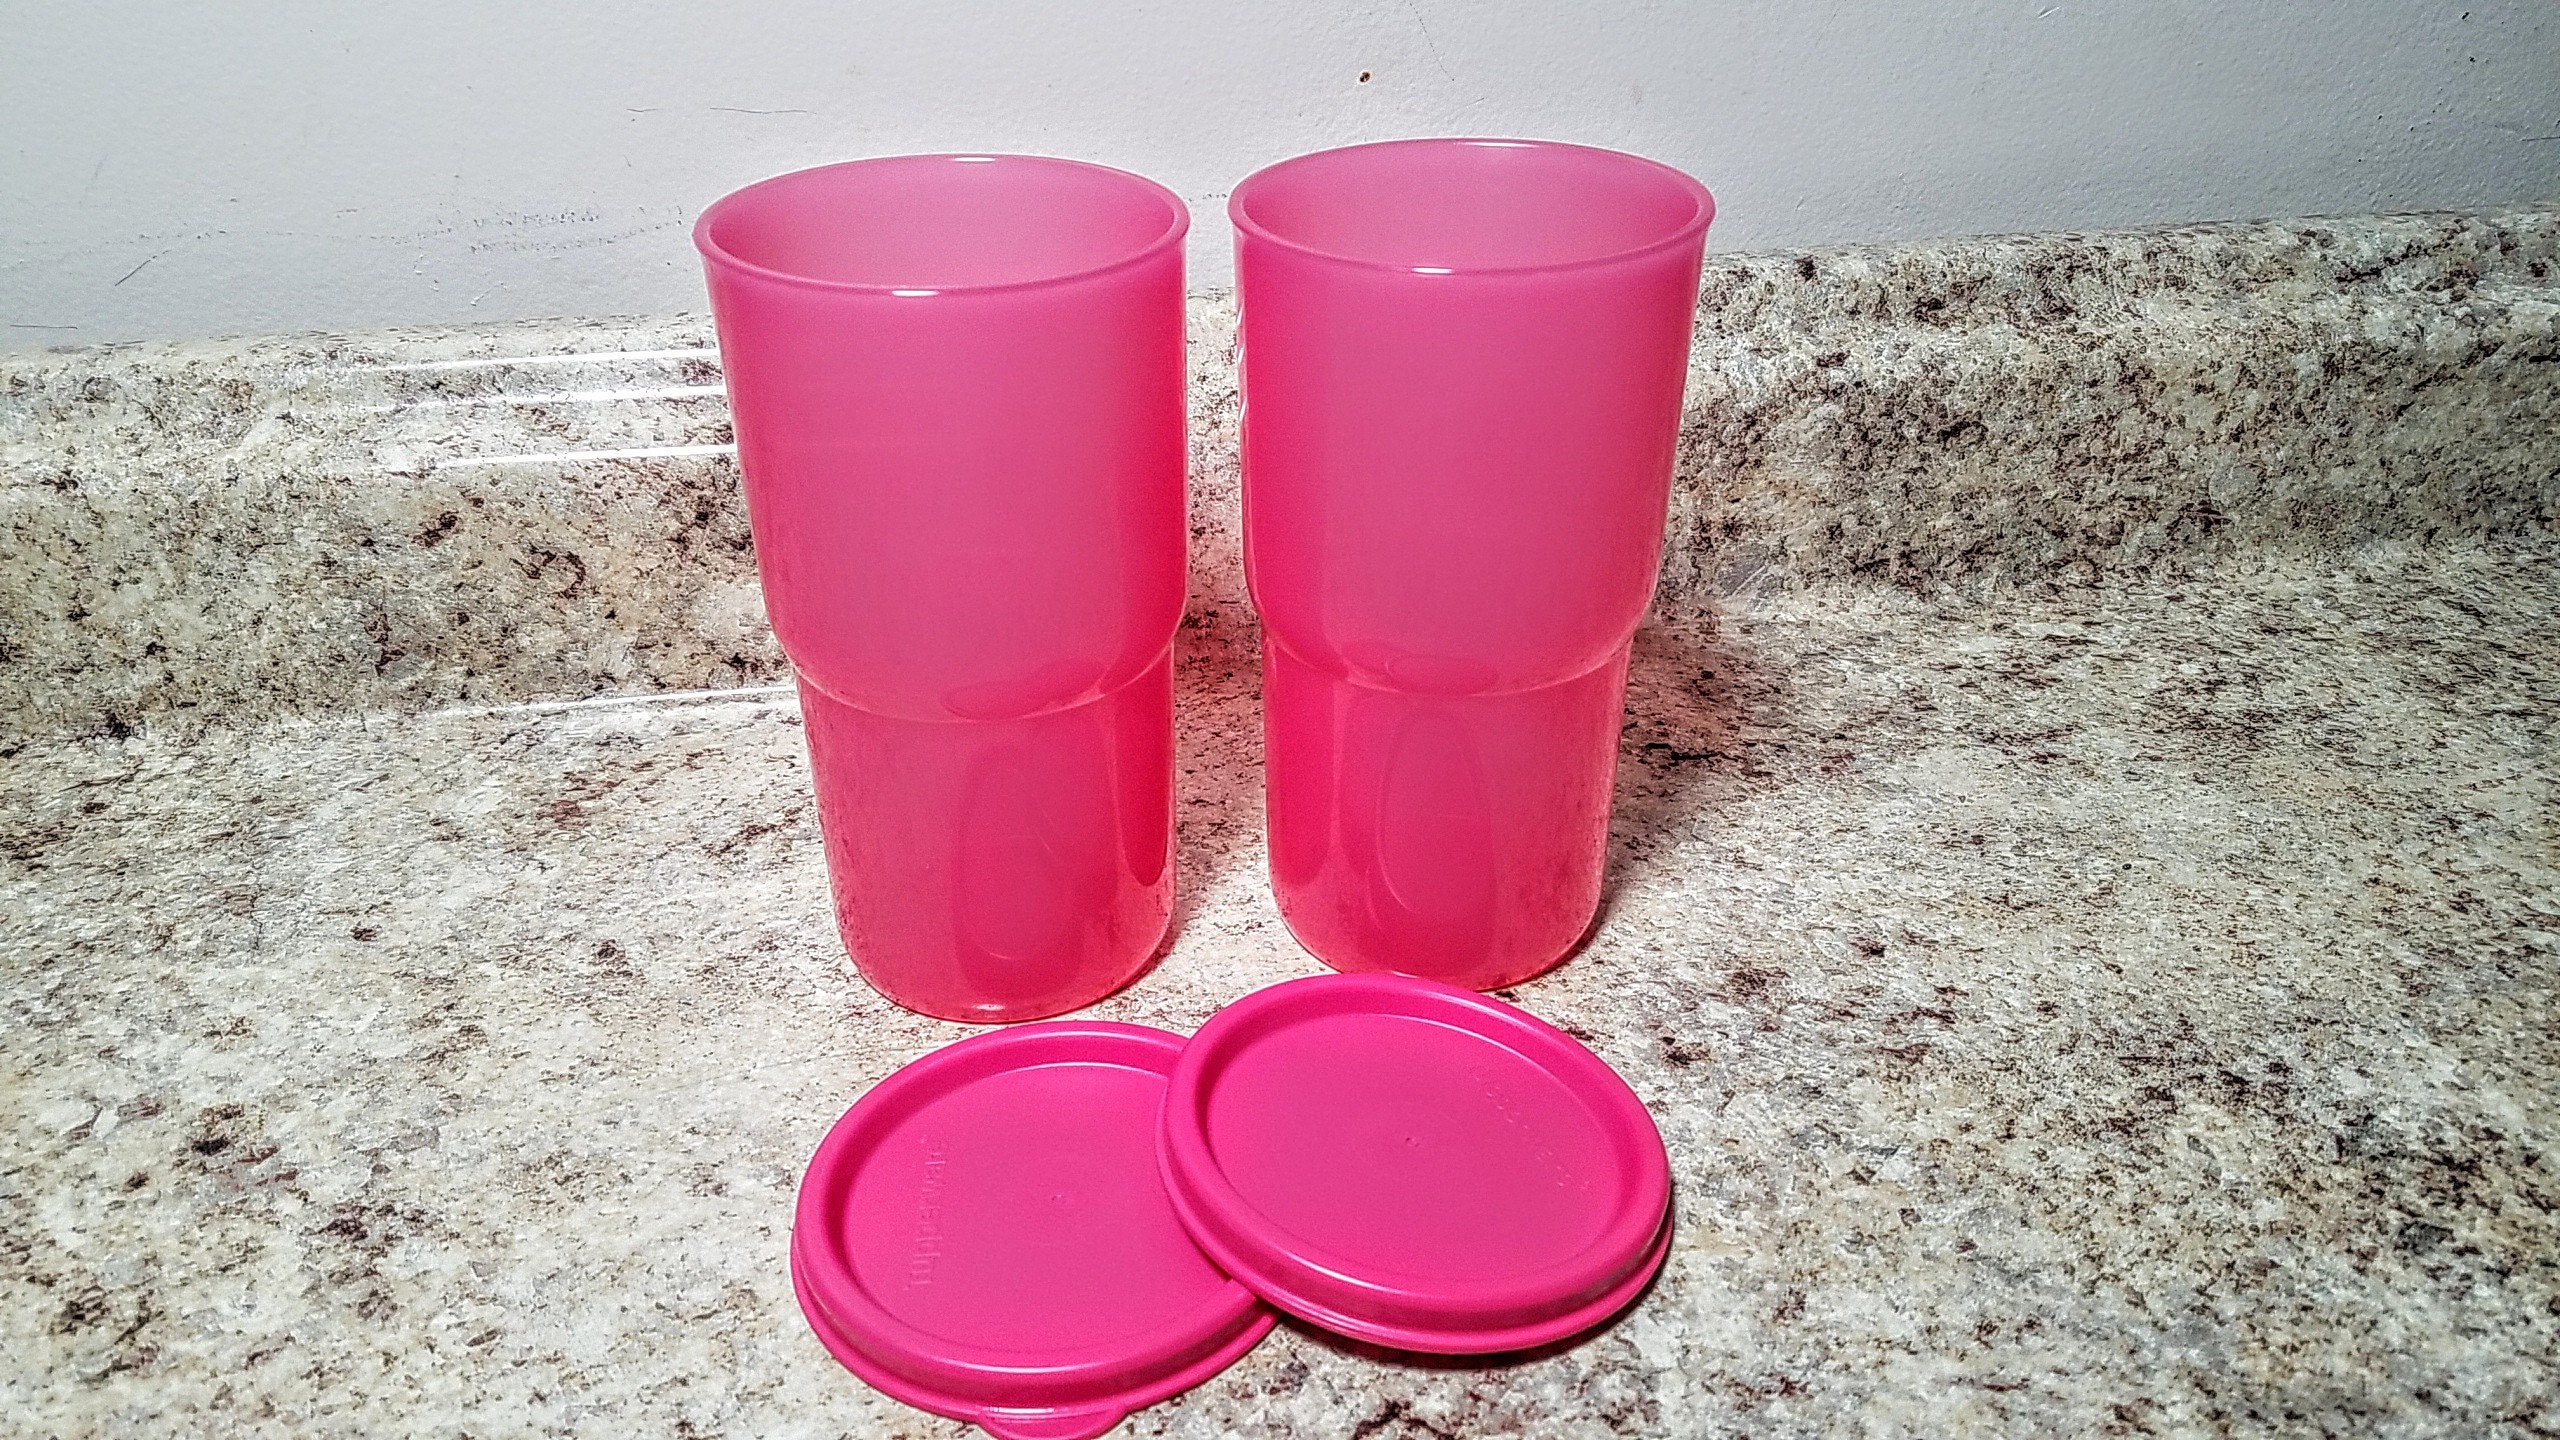 Vintage Tupperware Textured Tumblers with Seals Country Pastels 12 Ounce